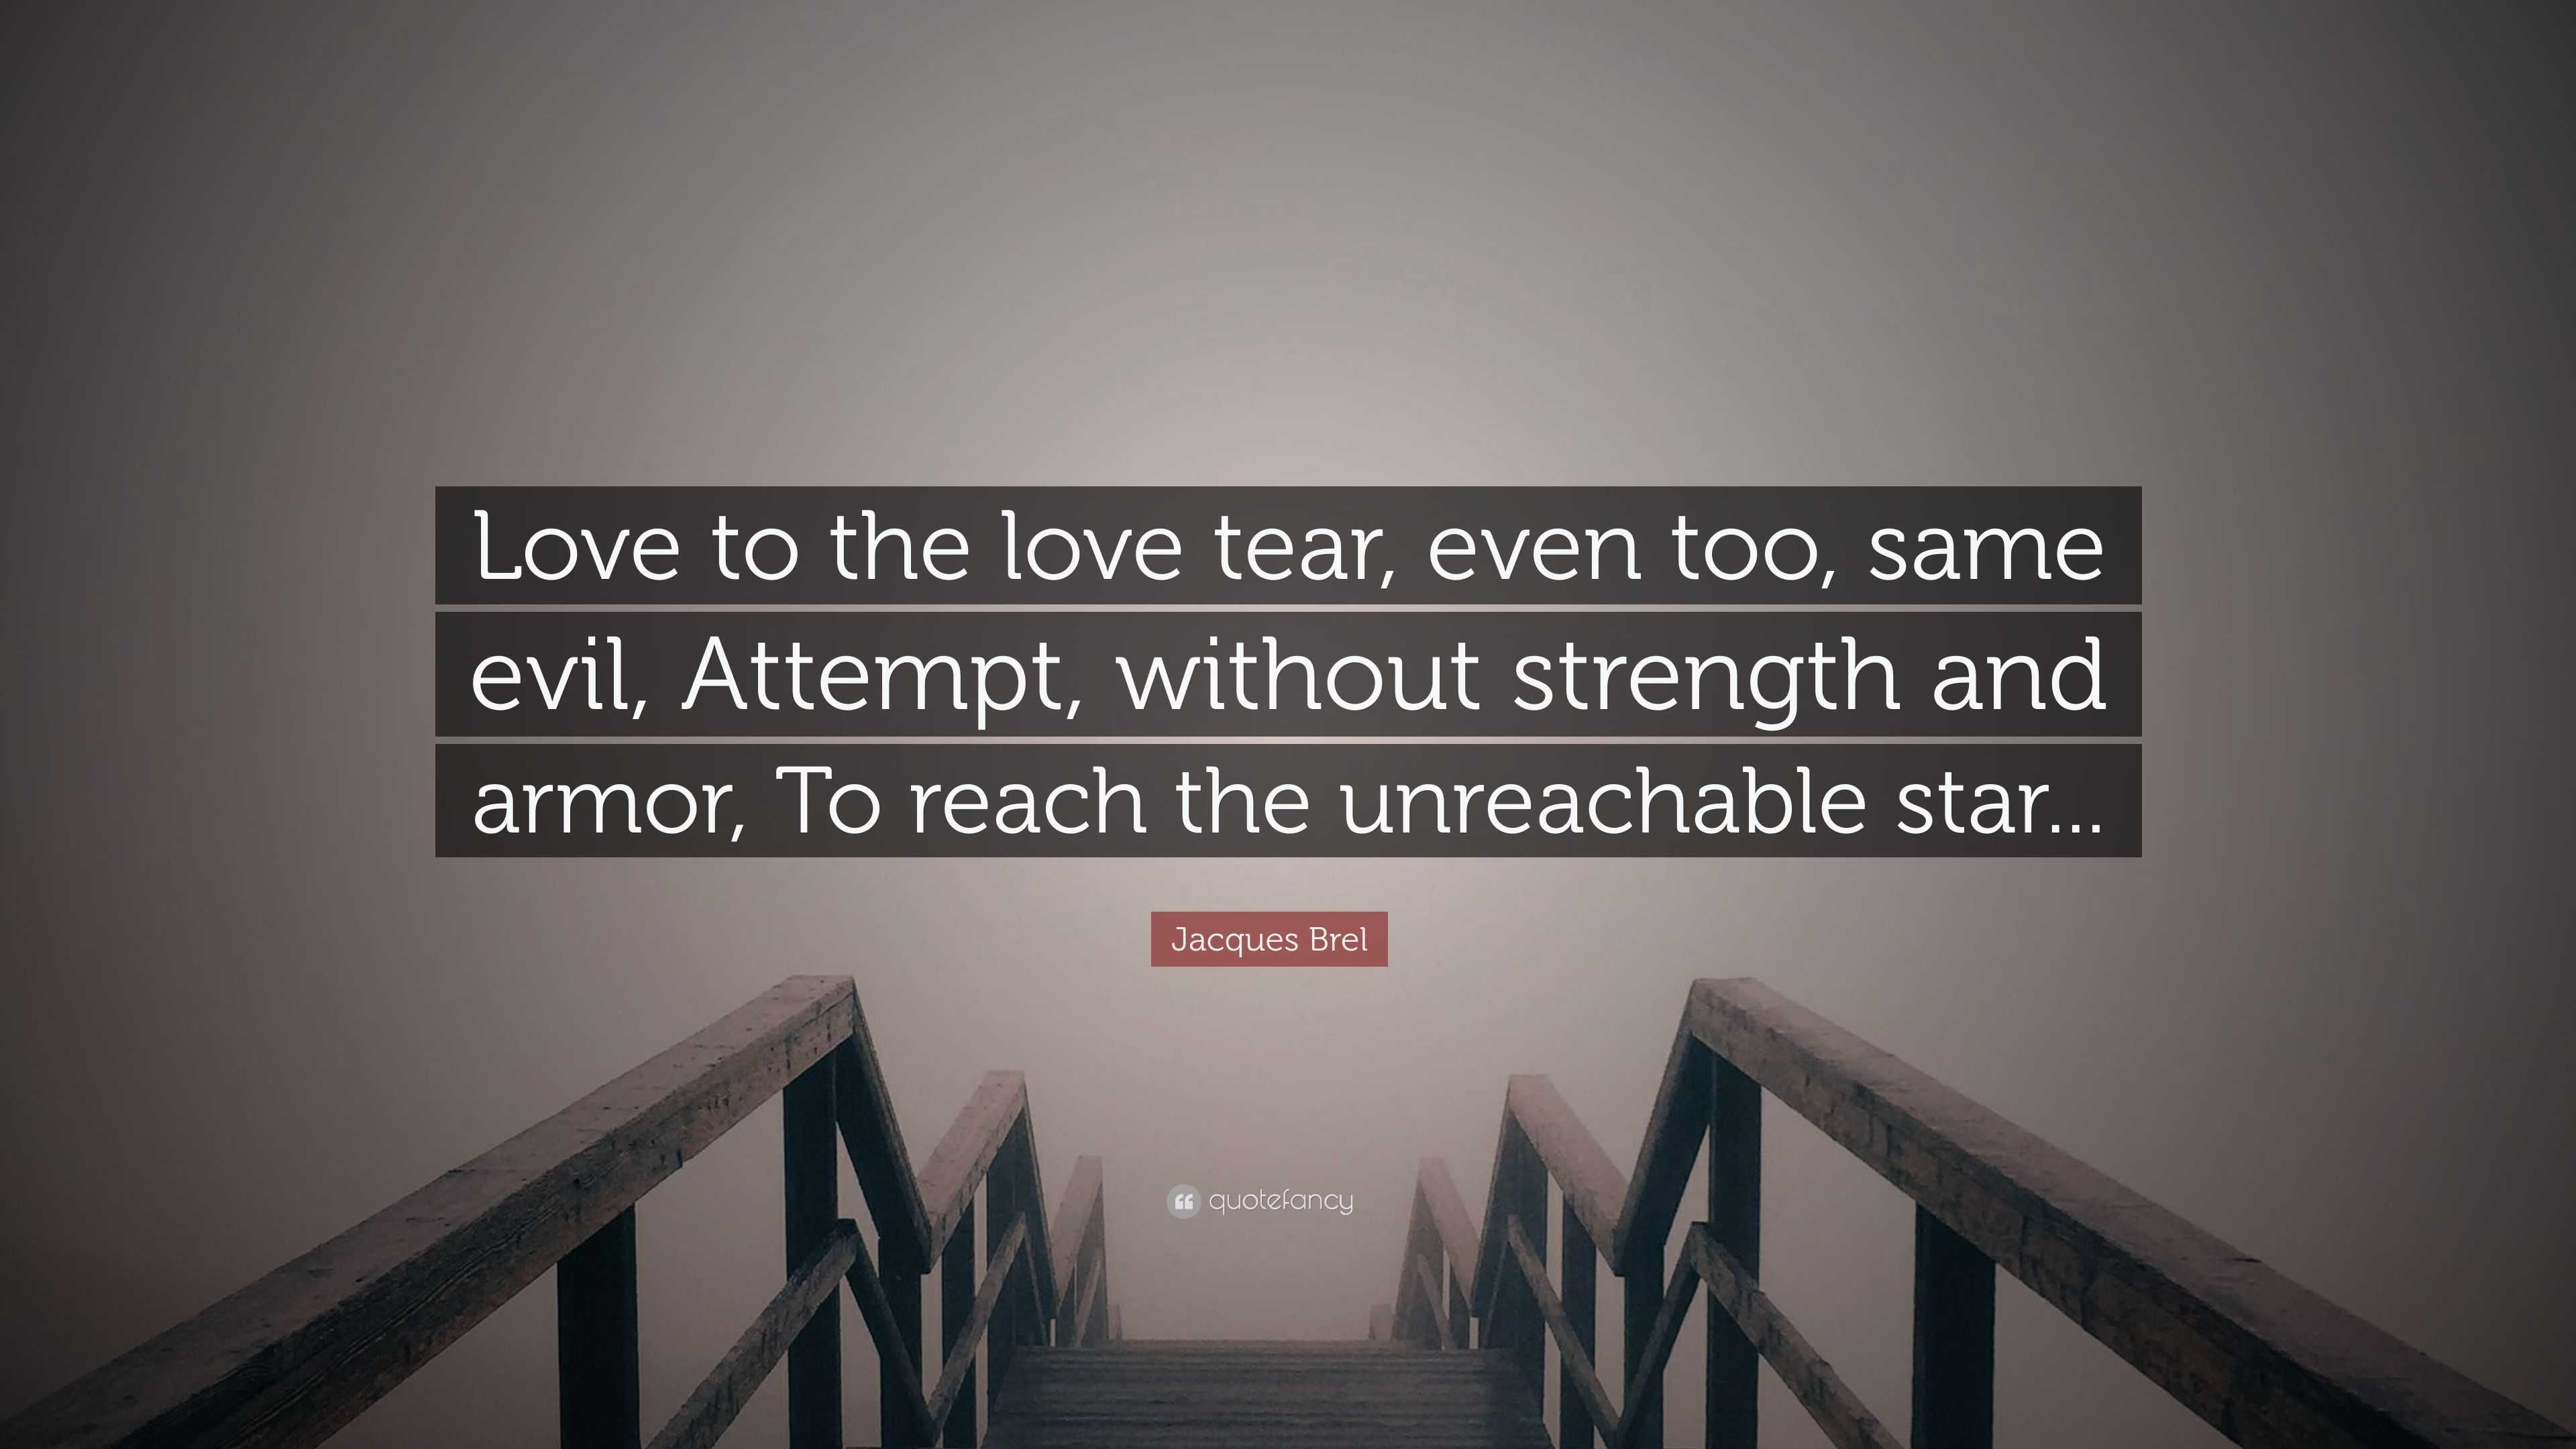 Jacques Brel Quote Love To The Love Tear Even Too Same Evil Attempt Without Strength And